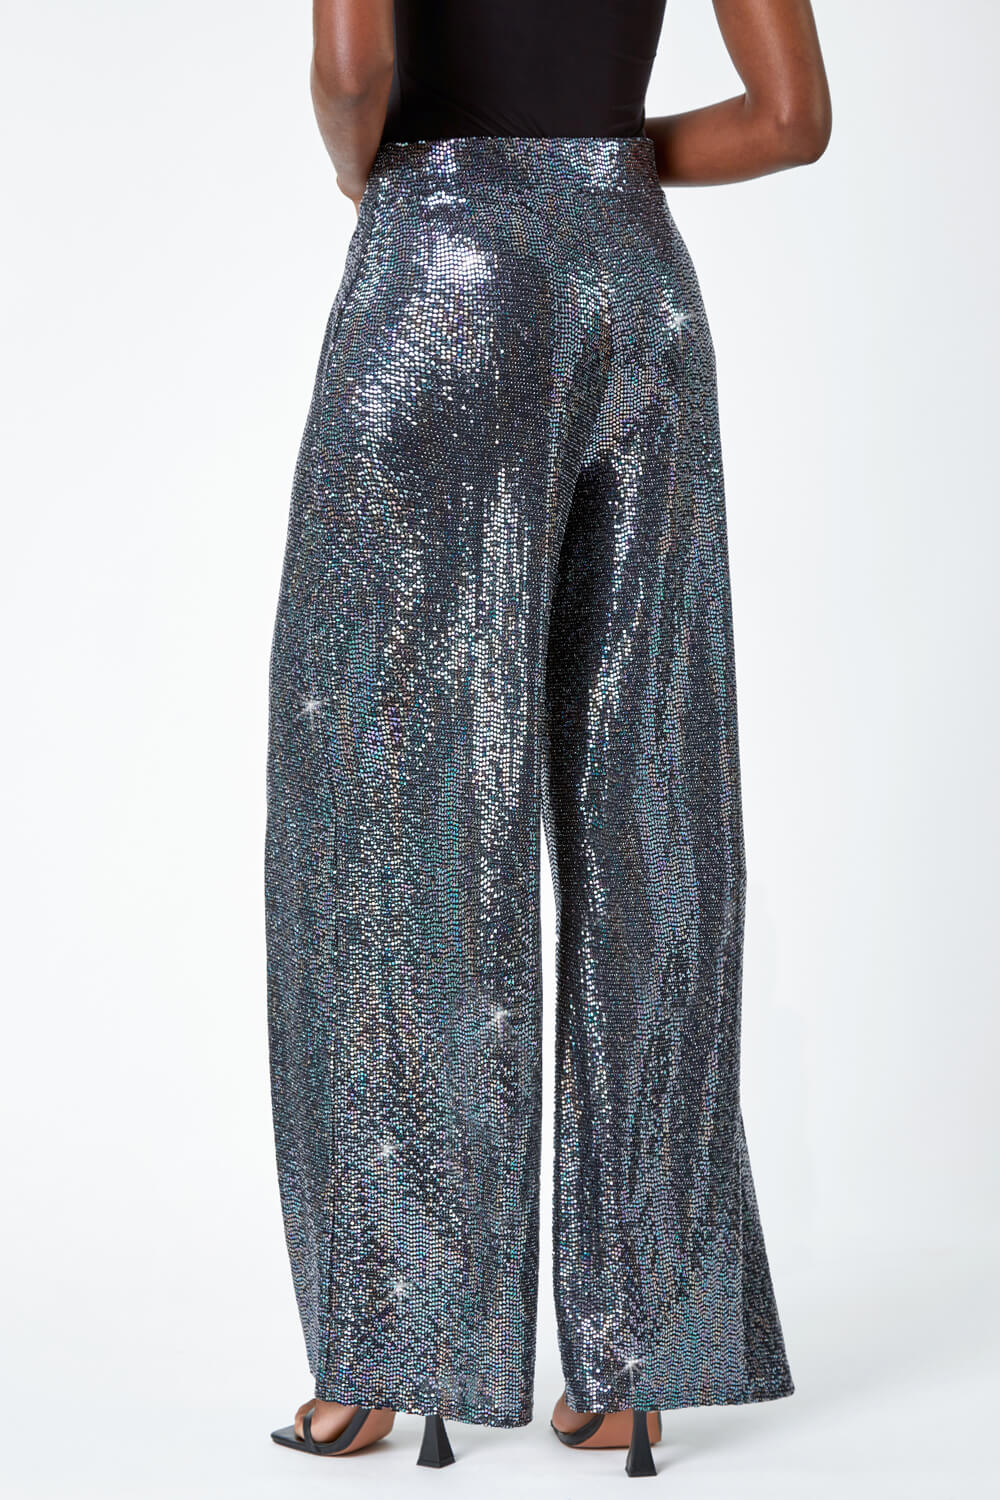 Silver Wide Leg Sequin Stretch Trousers, Image 3 of 7